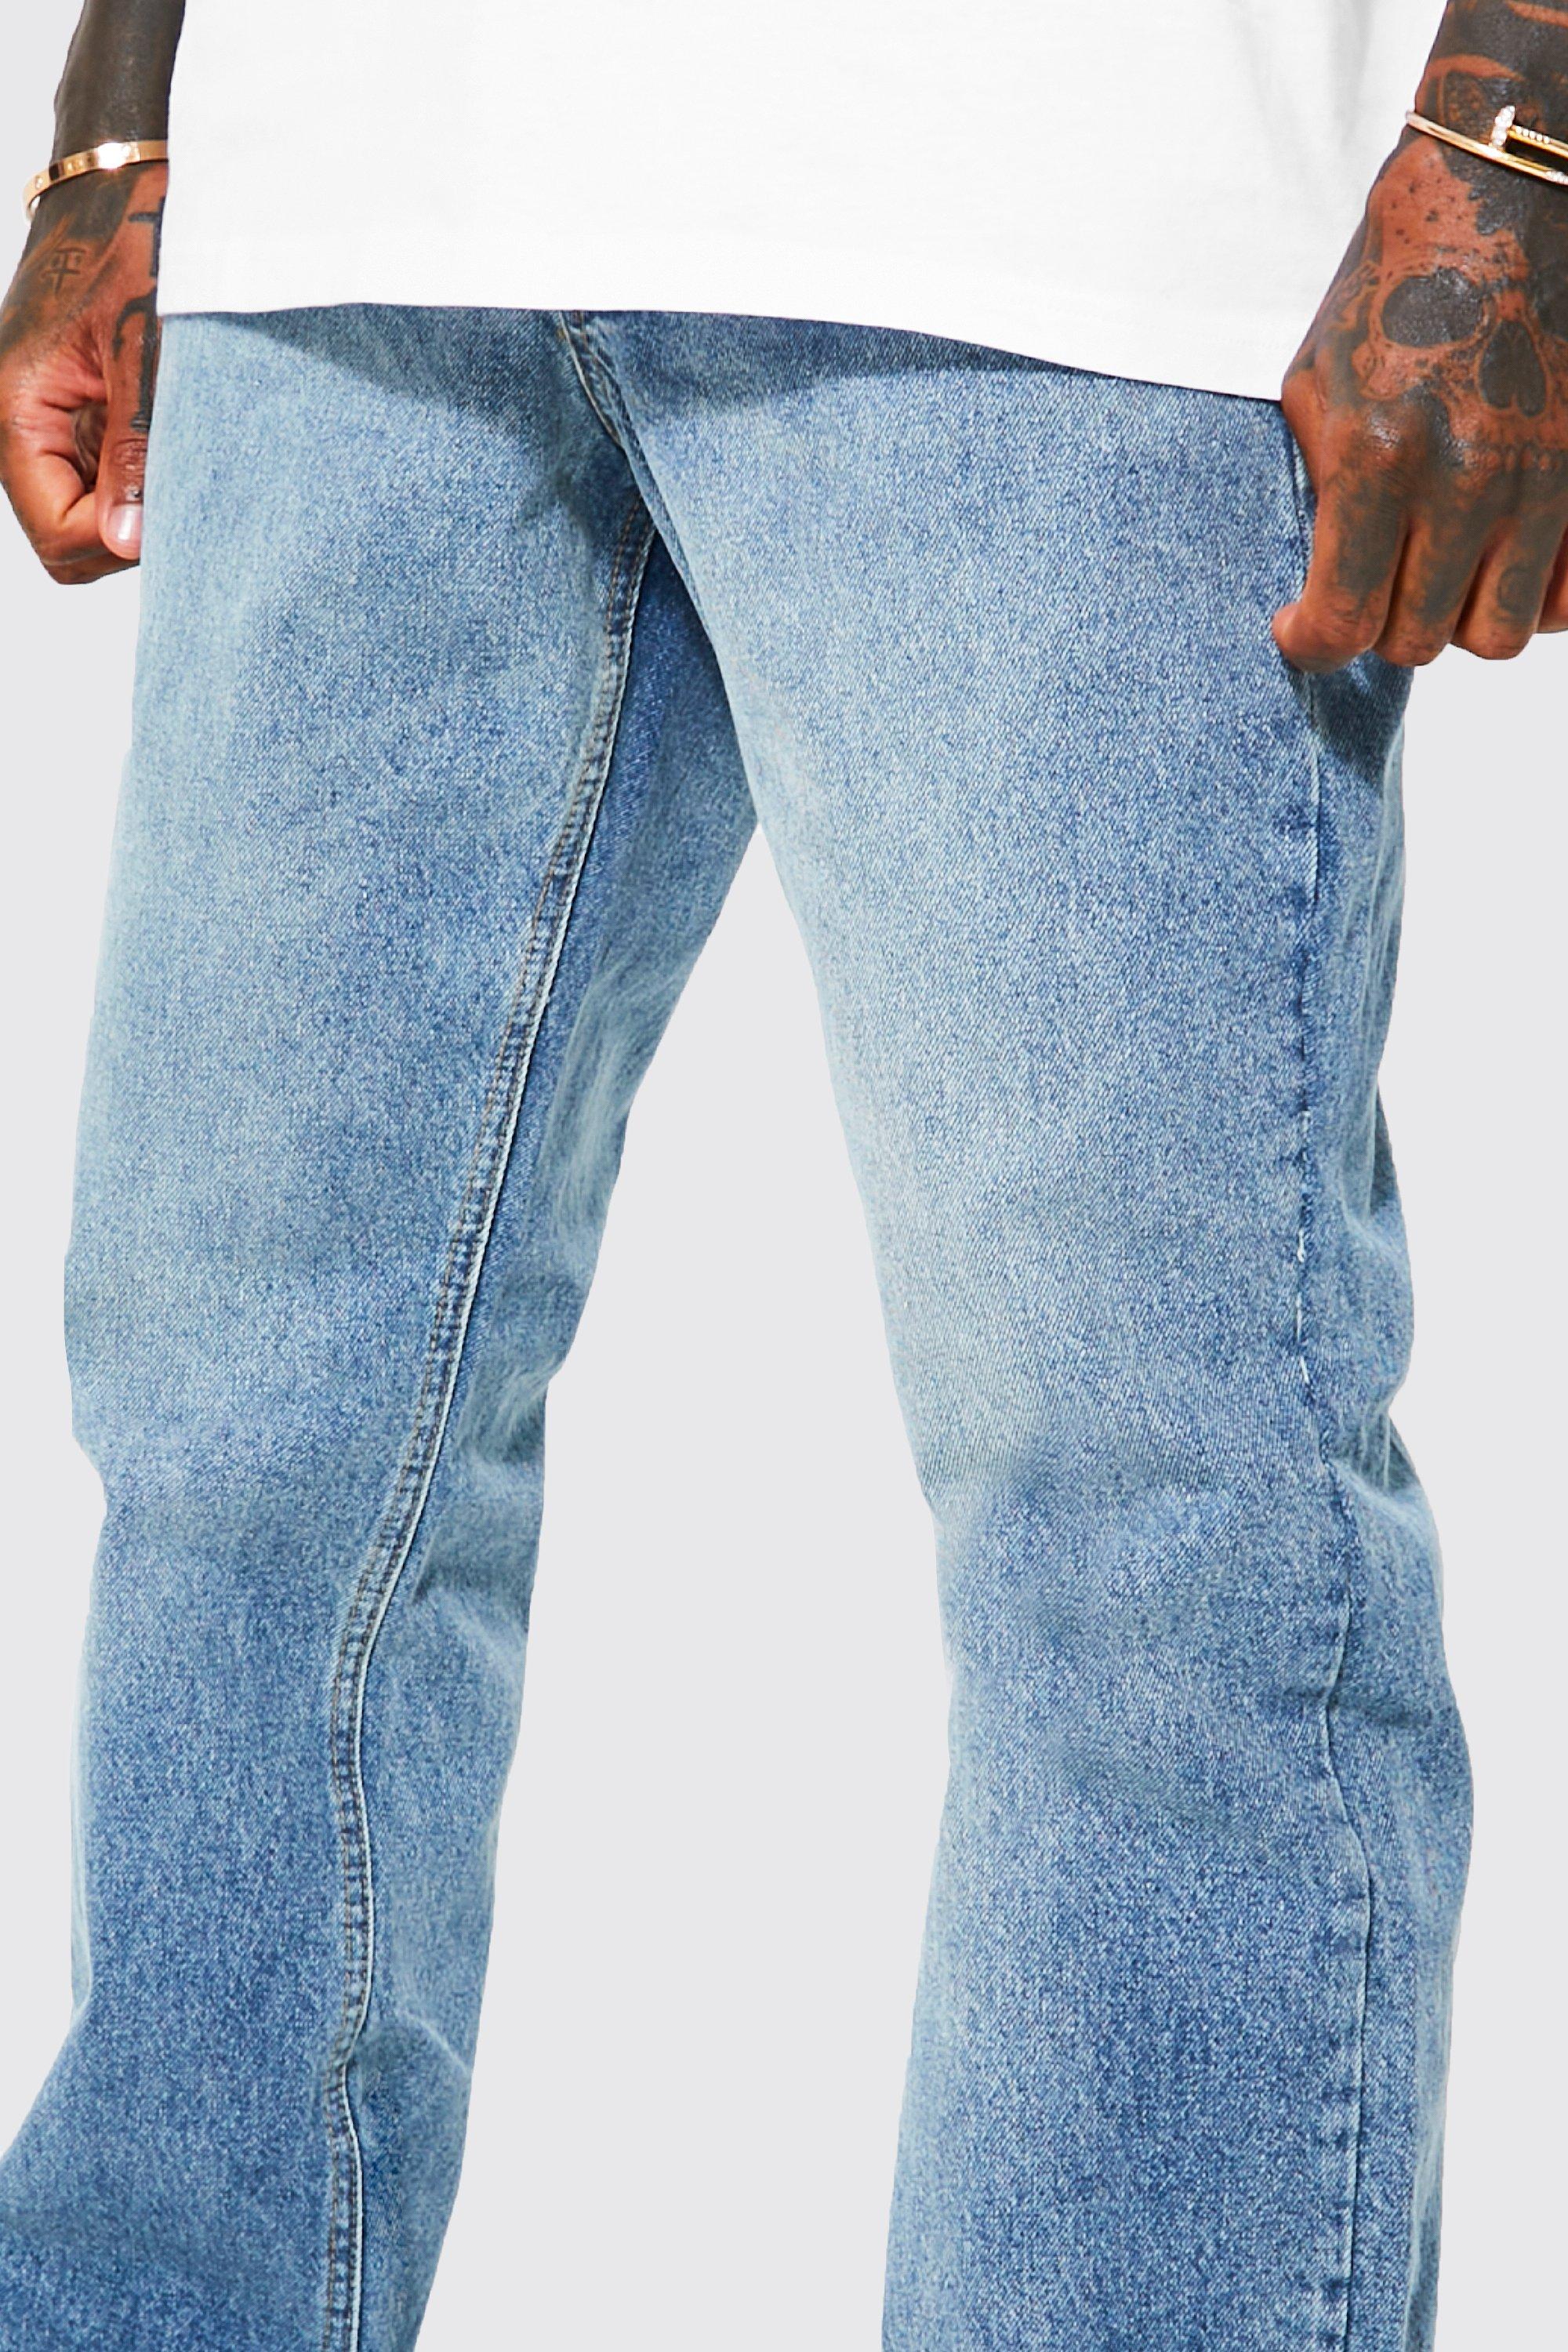 Relaxed Fit Rigid Jeans